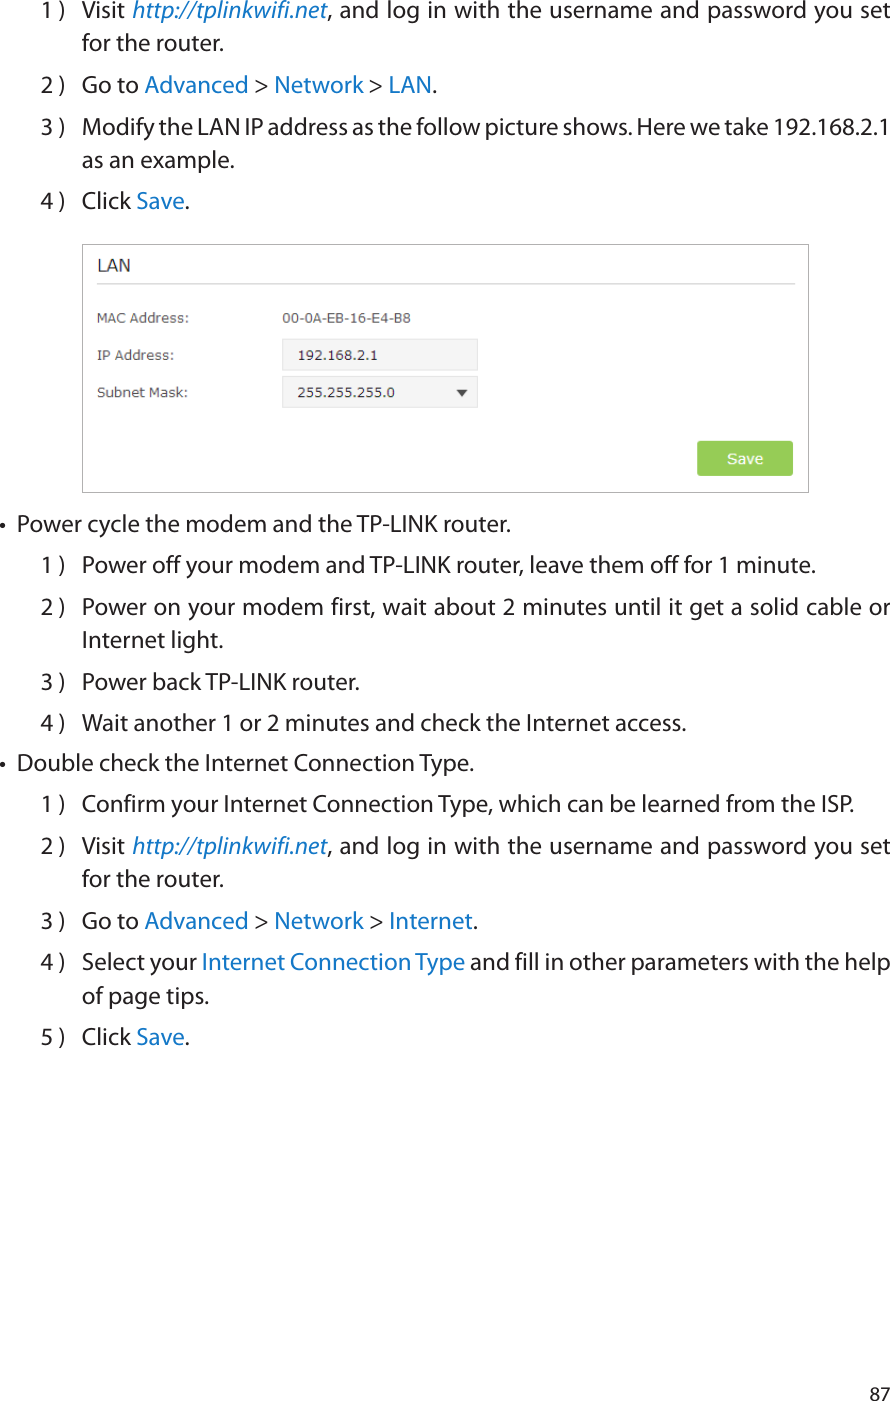 871 )  Visit http://tplinkwifi.net, and log in with the username and password you set for the router.2 )  Go to Advanced &gt; Network &gt; LAN.3 )  Modify the LAN IP address as the follow picture shows. Here we take 192.168.2.1 as an example.4 )  Click Save.•  Power cycle the modem and the TP-LINK router.1 )  Power off your modem and TP-LINK router, leave them off for 1 minute.2 )  Power on your modem first, wait about 2 minutes until it get a solid cable or Internet light.3 )  Power back TP-LINK router.4 )  Wait another 1 or 2 minutes and check the Internet access.•  Double check the Internet Connection Type.1 )  Confirm your Internet Connection Type, which can be learned from the ISP.2 )  Visit http://tplinkwifi.net, and log in with the username and password you set for the router.3 )  Go to Advanced &gt; Network &gt; Internet.4 )  Select your Internet Connection Type and fill in other parameters with the help of page tips.5 )  Click Save.